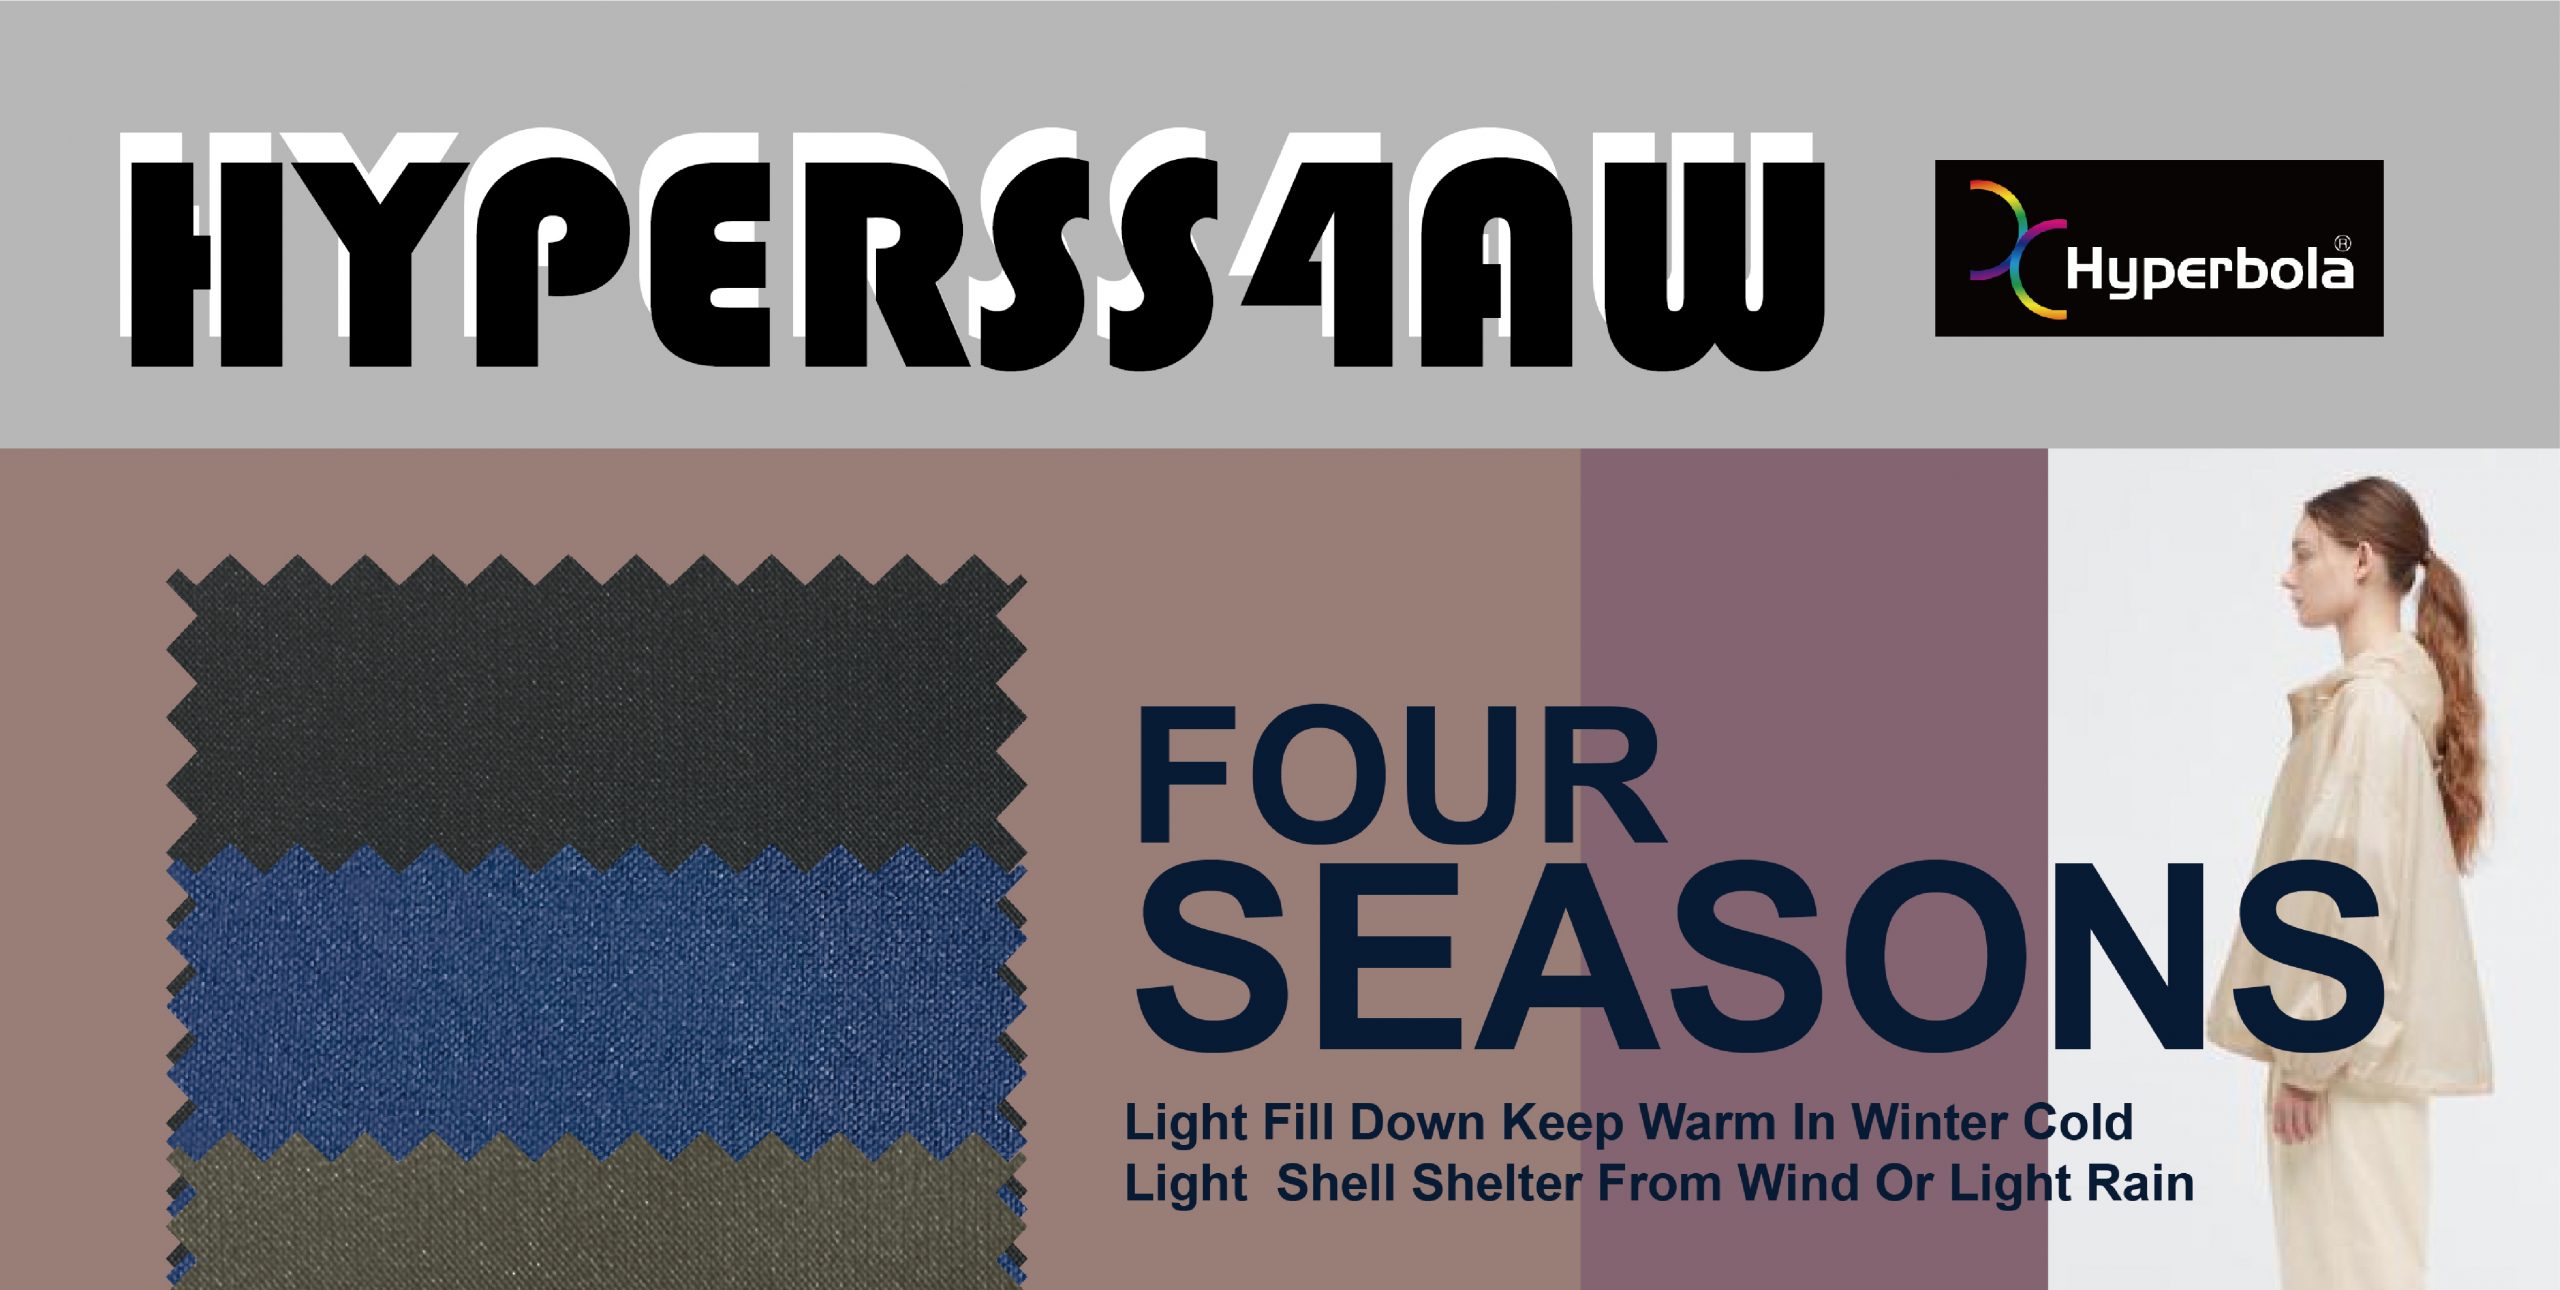 HYPERSS4AW  IS TALKING ABOUT FOUR SEASONS DESIGN CONCEPT.™